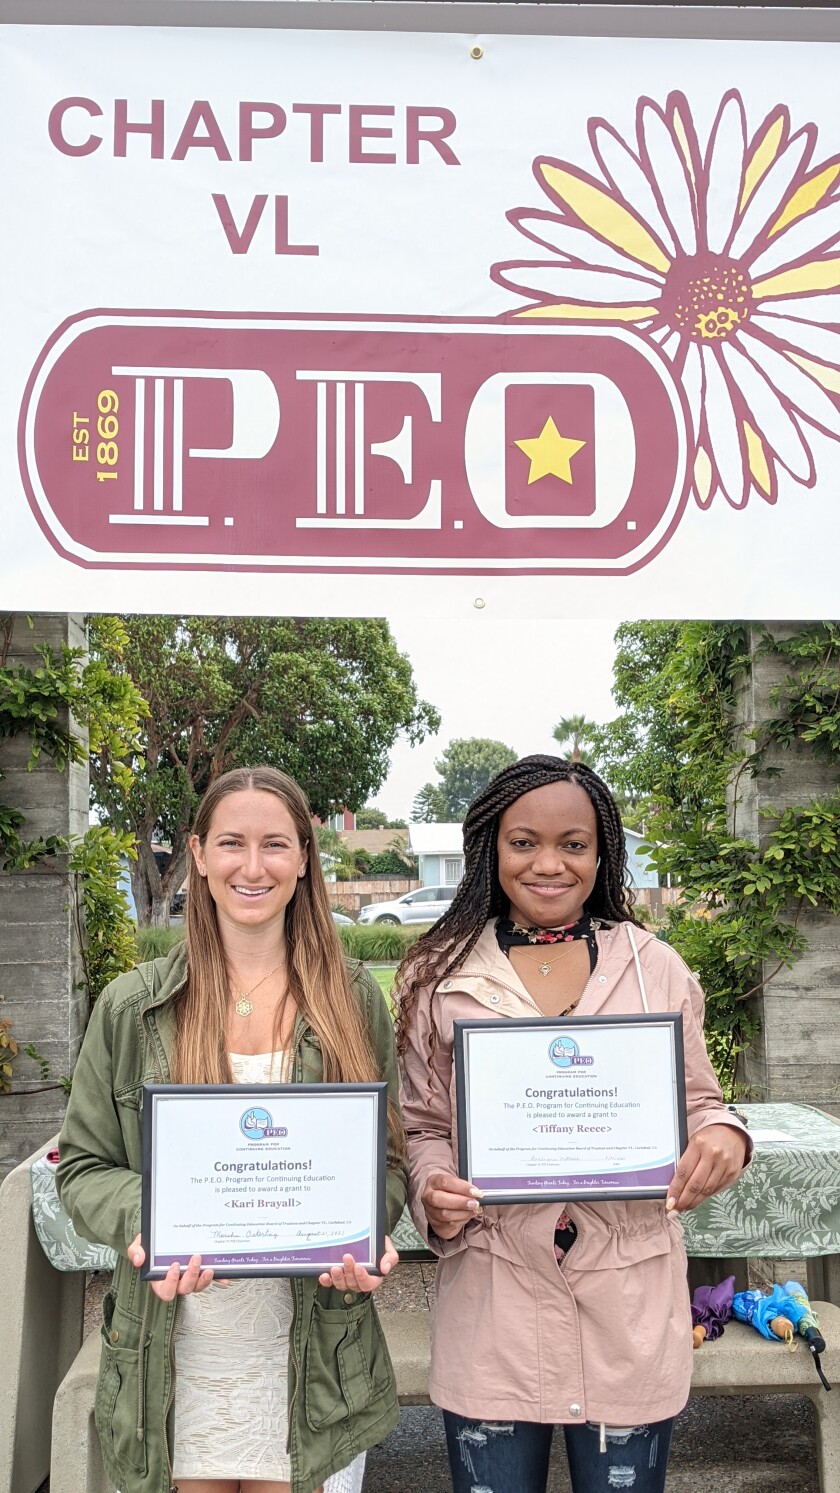 MiraCosta students Kari Brayall and Tiffany Reece each received $ 3,000 from the PEO  